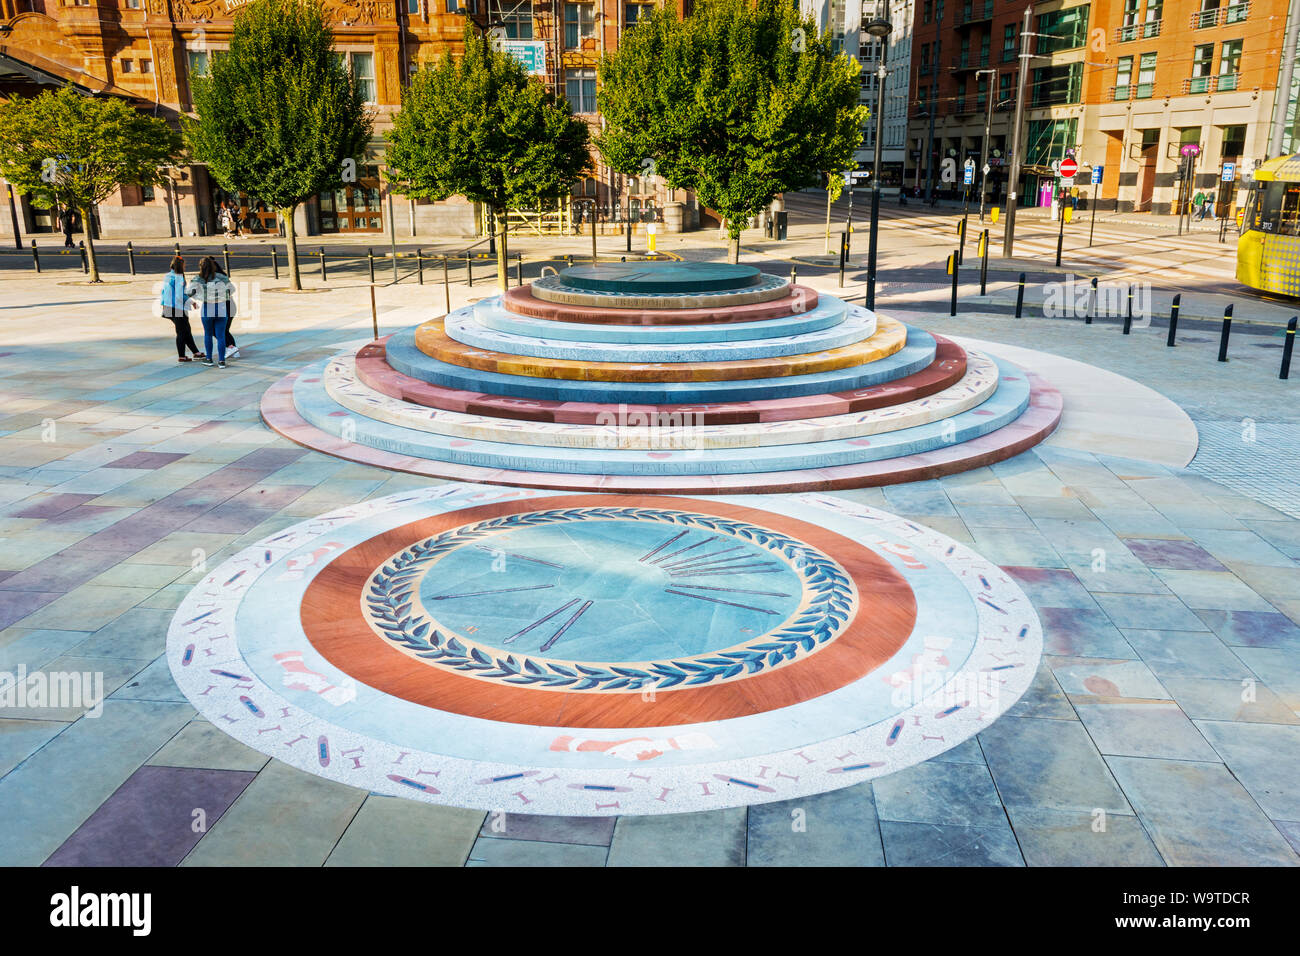 The Peterloo Massacre memorial, designed by Jeremy Deller, outside the Manchester Central building, Manchester, UK Stock Photo